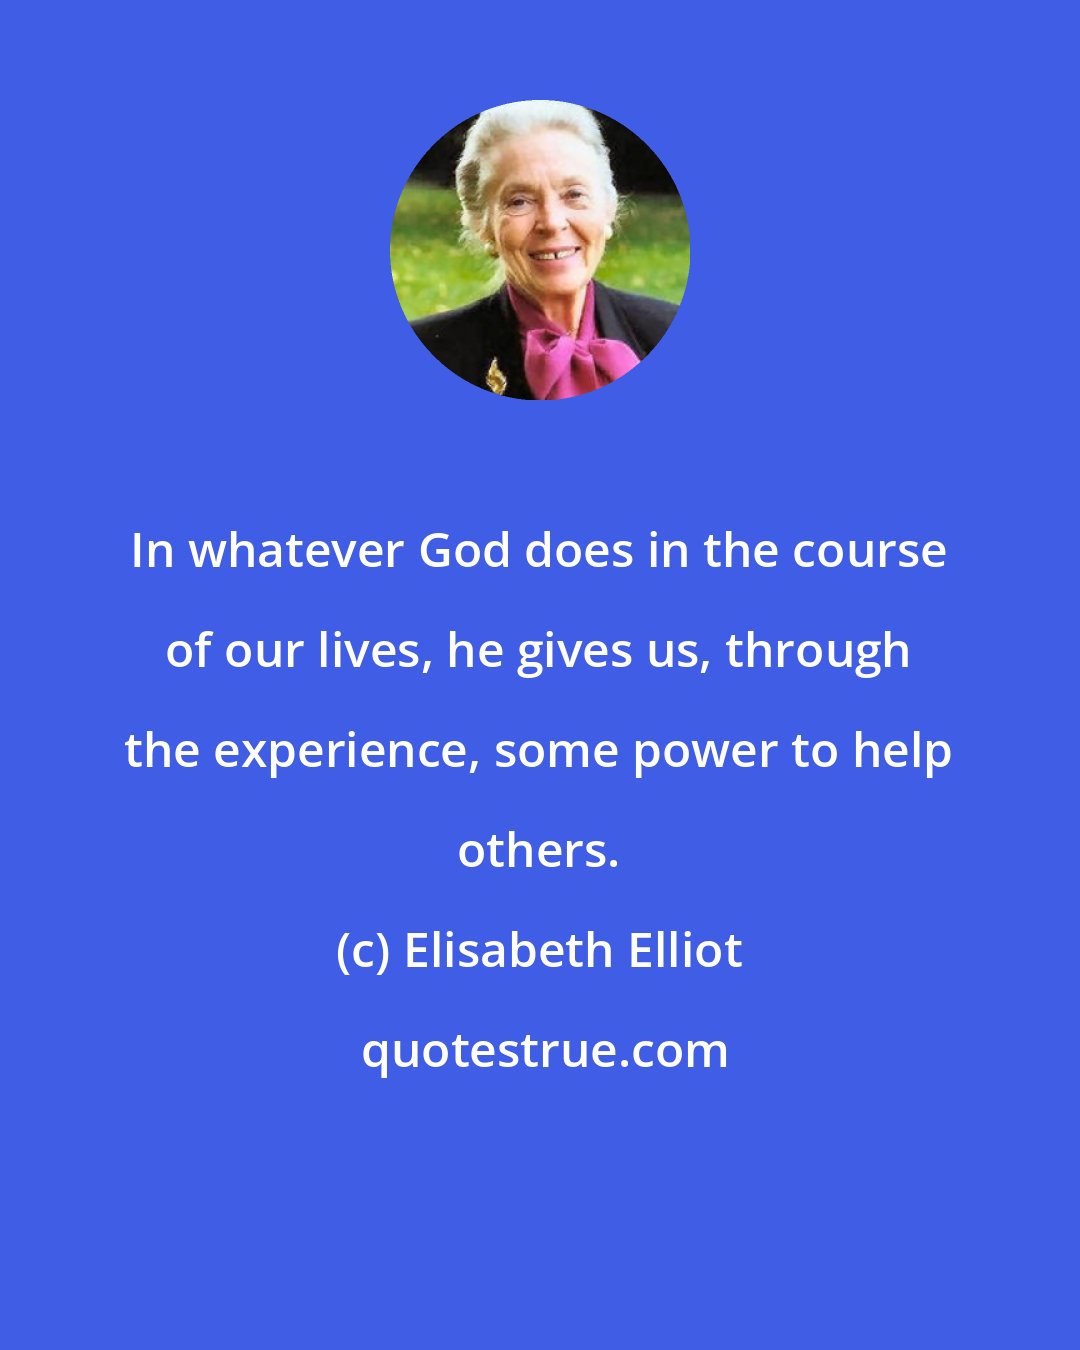 Elisabeth Elliot: In whatever God does in the course of our lives, he gives us, through the experience, some power to help others.